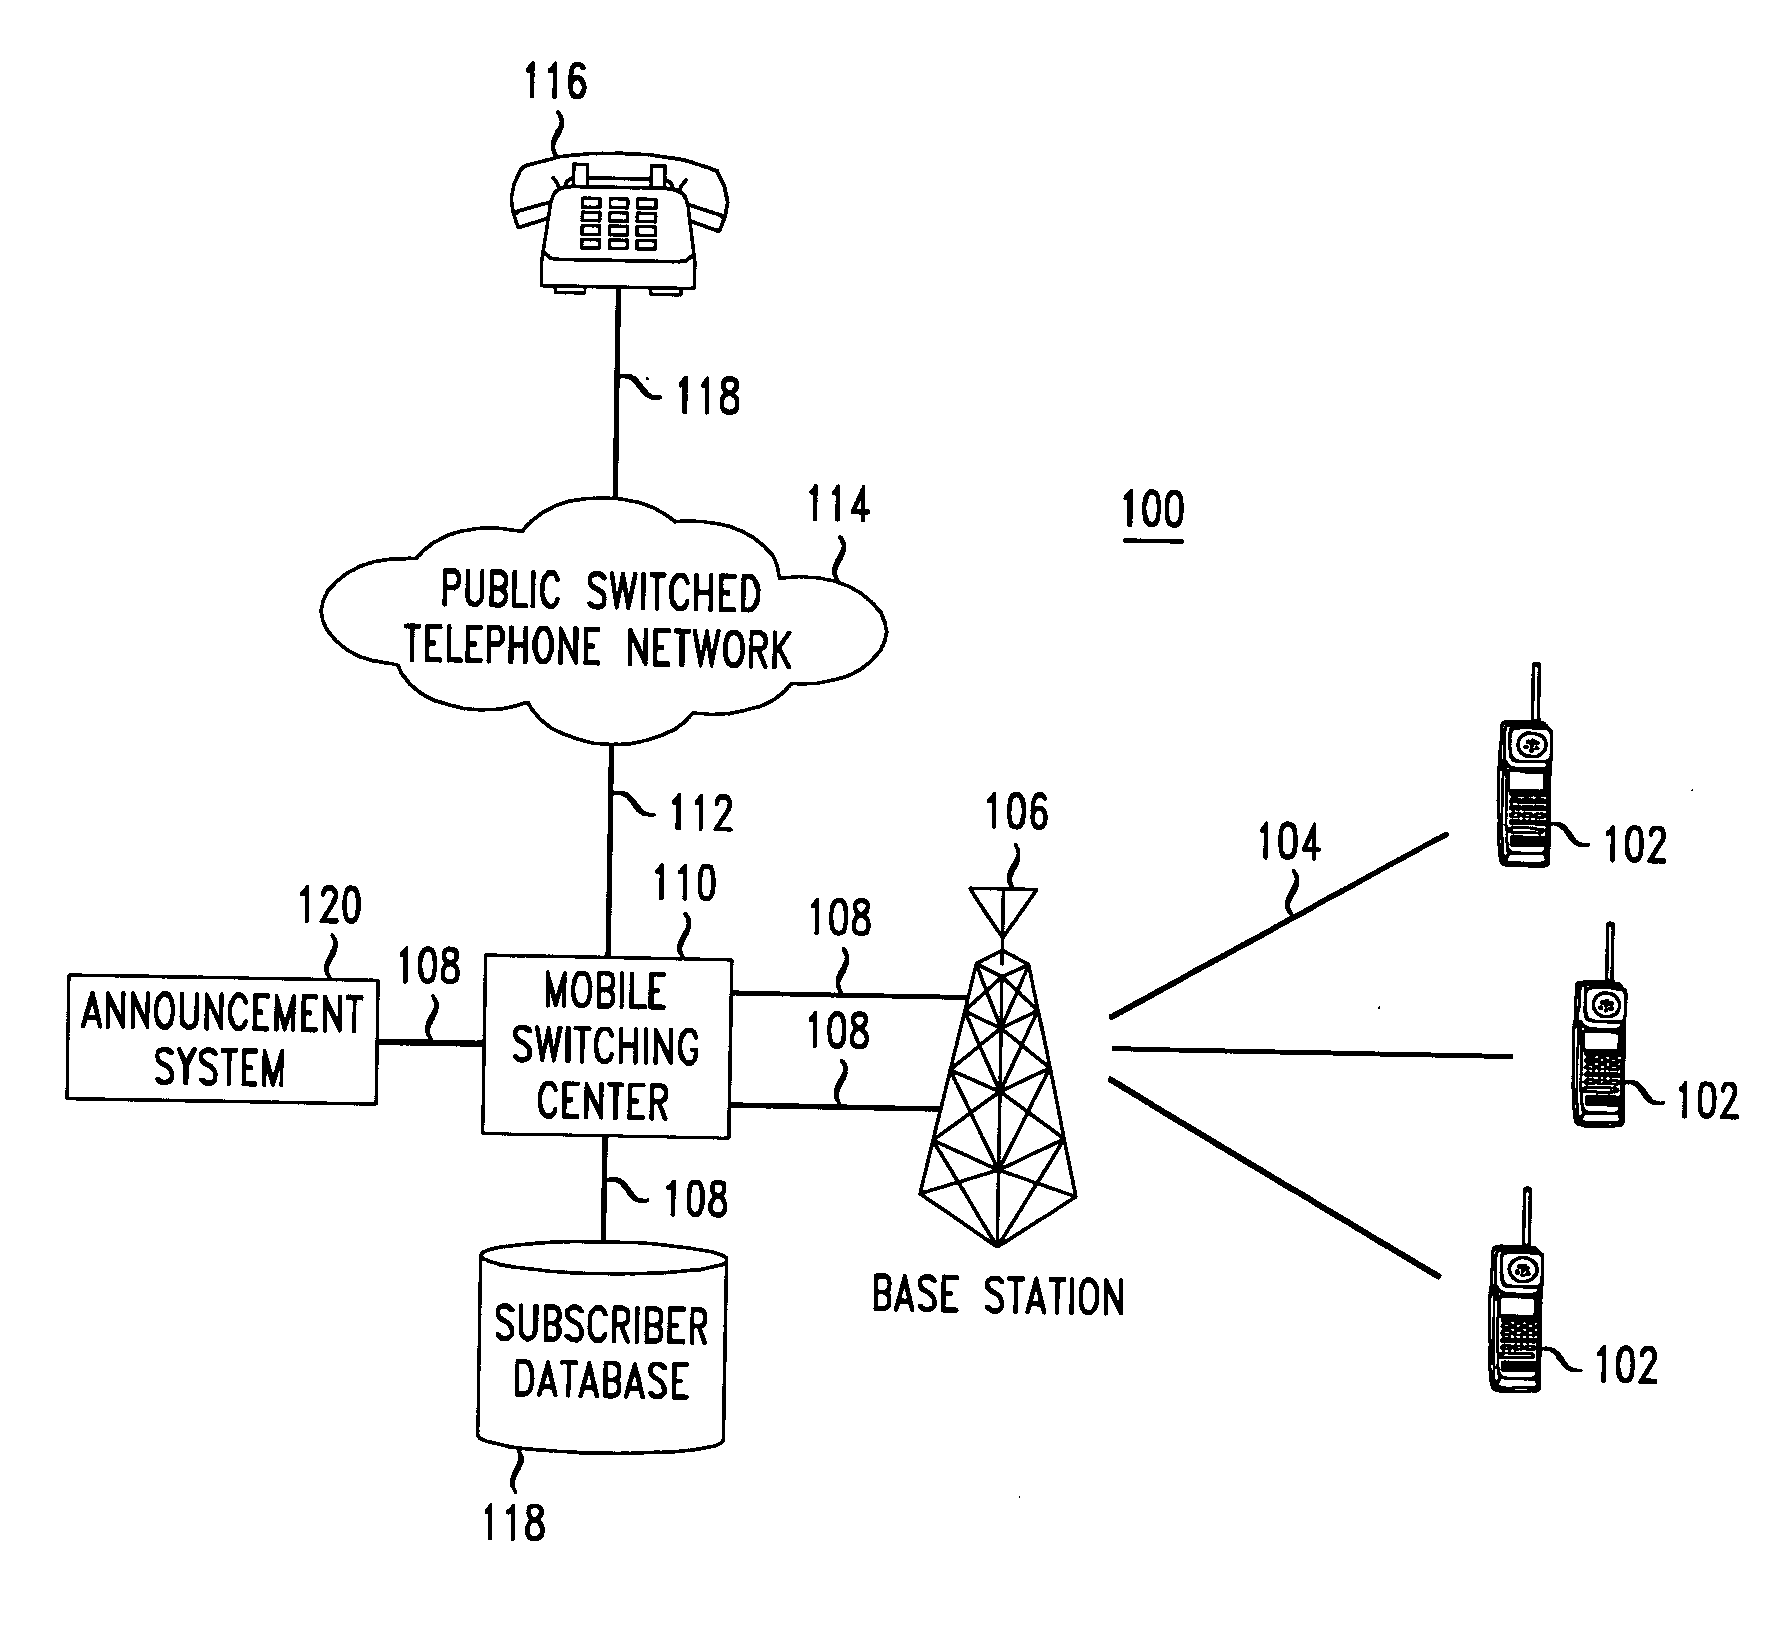 Wireless service sharing between multiple mobile devices of a party